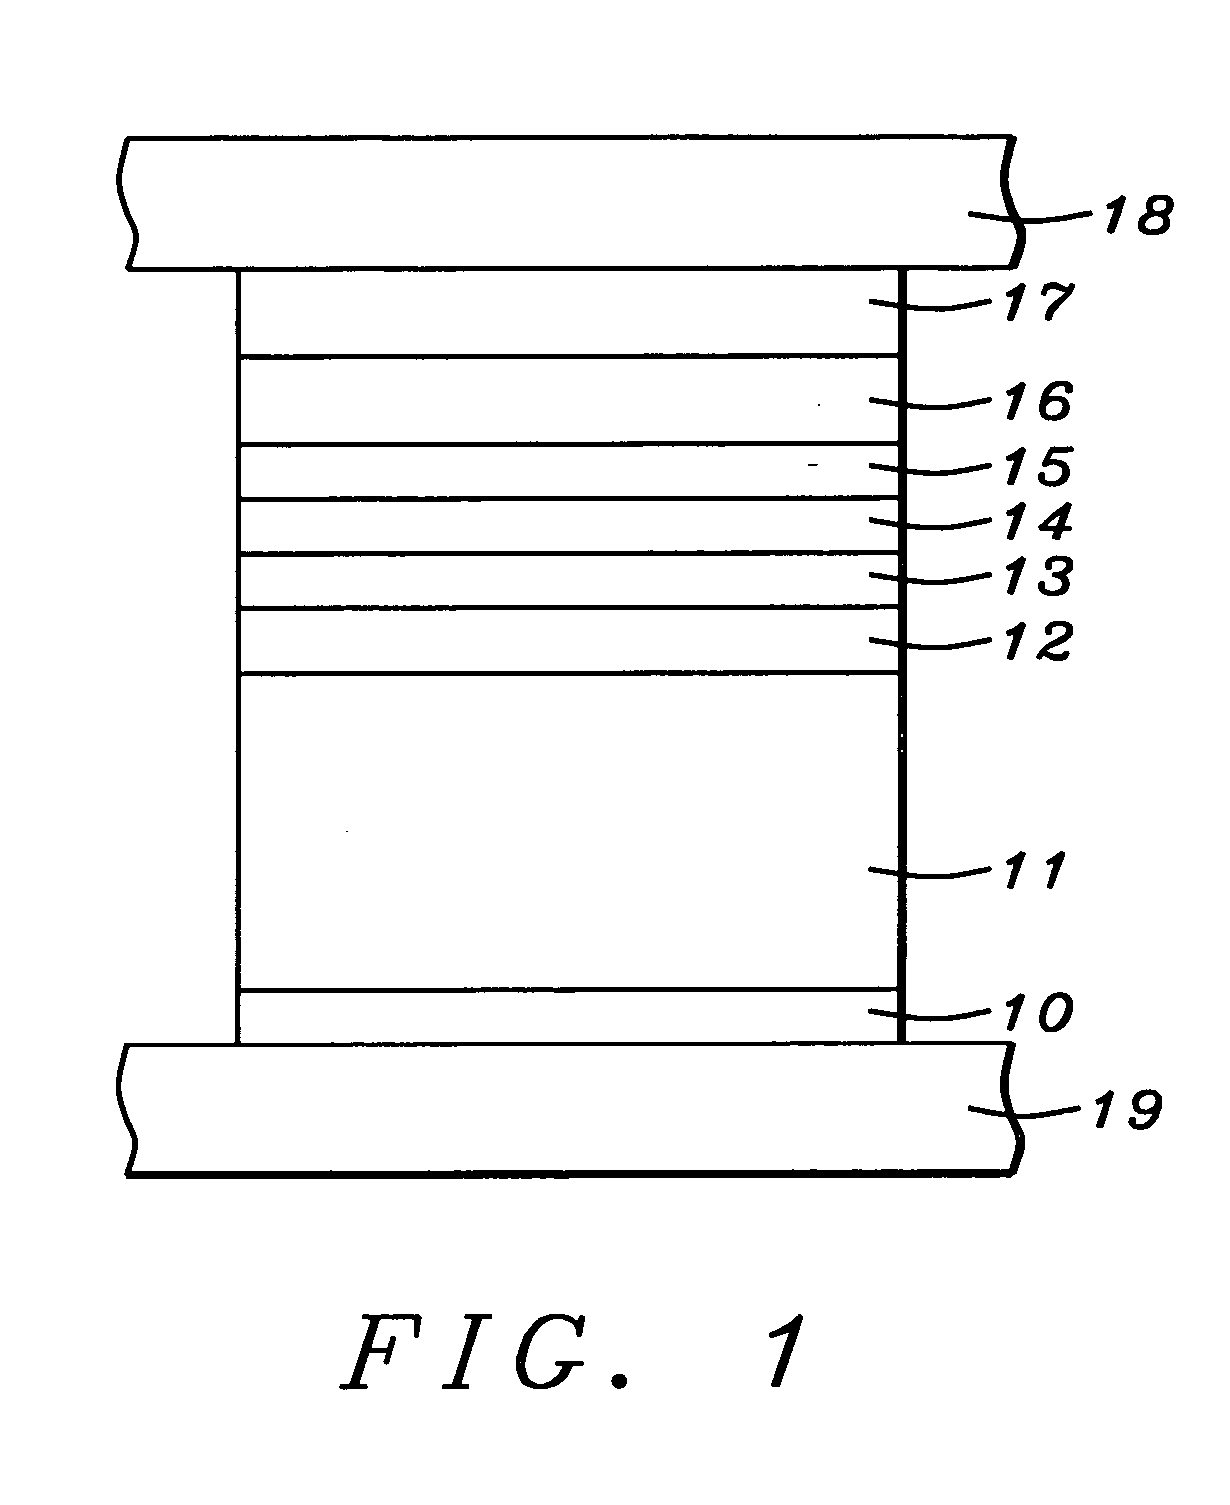 Amorphous layers in a magnetic tunnel junction device